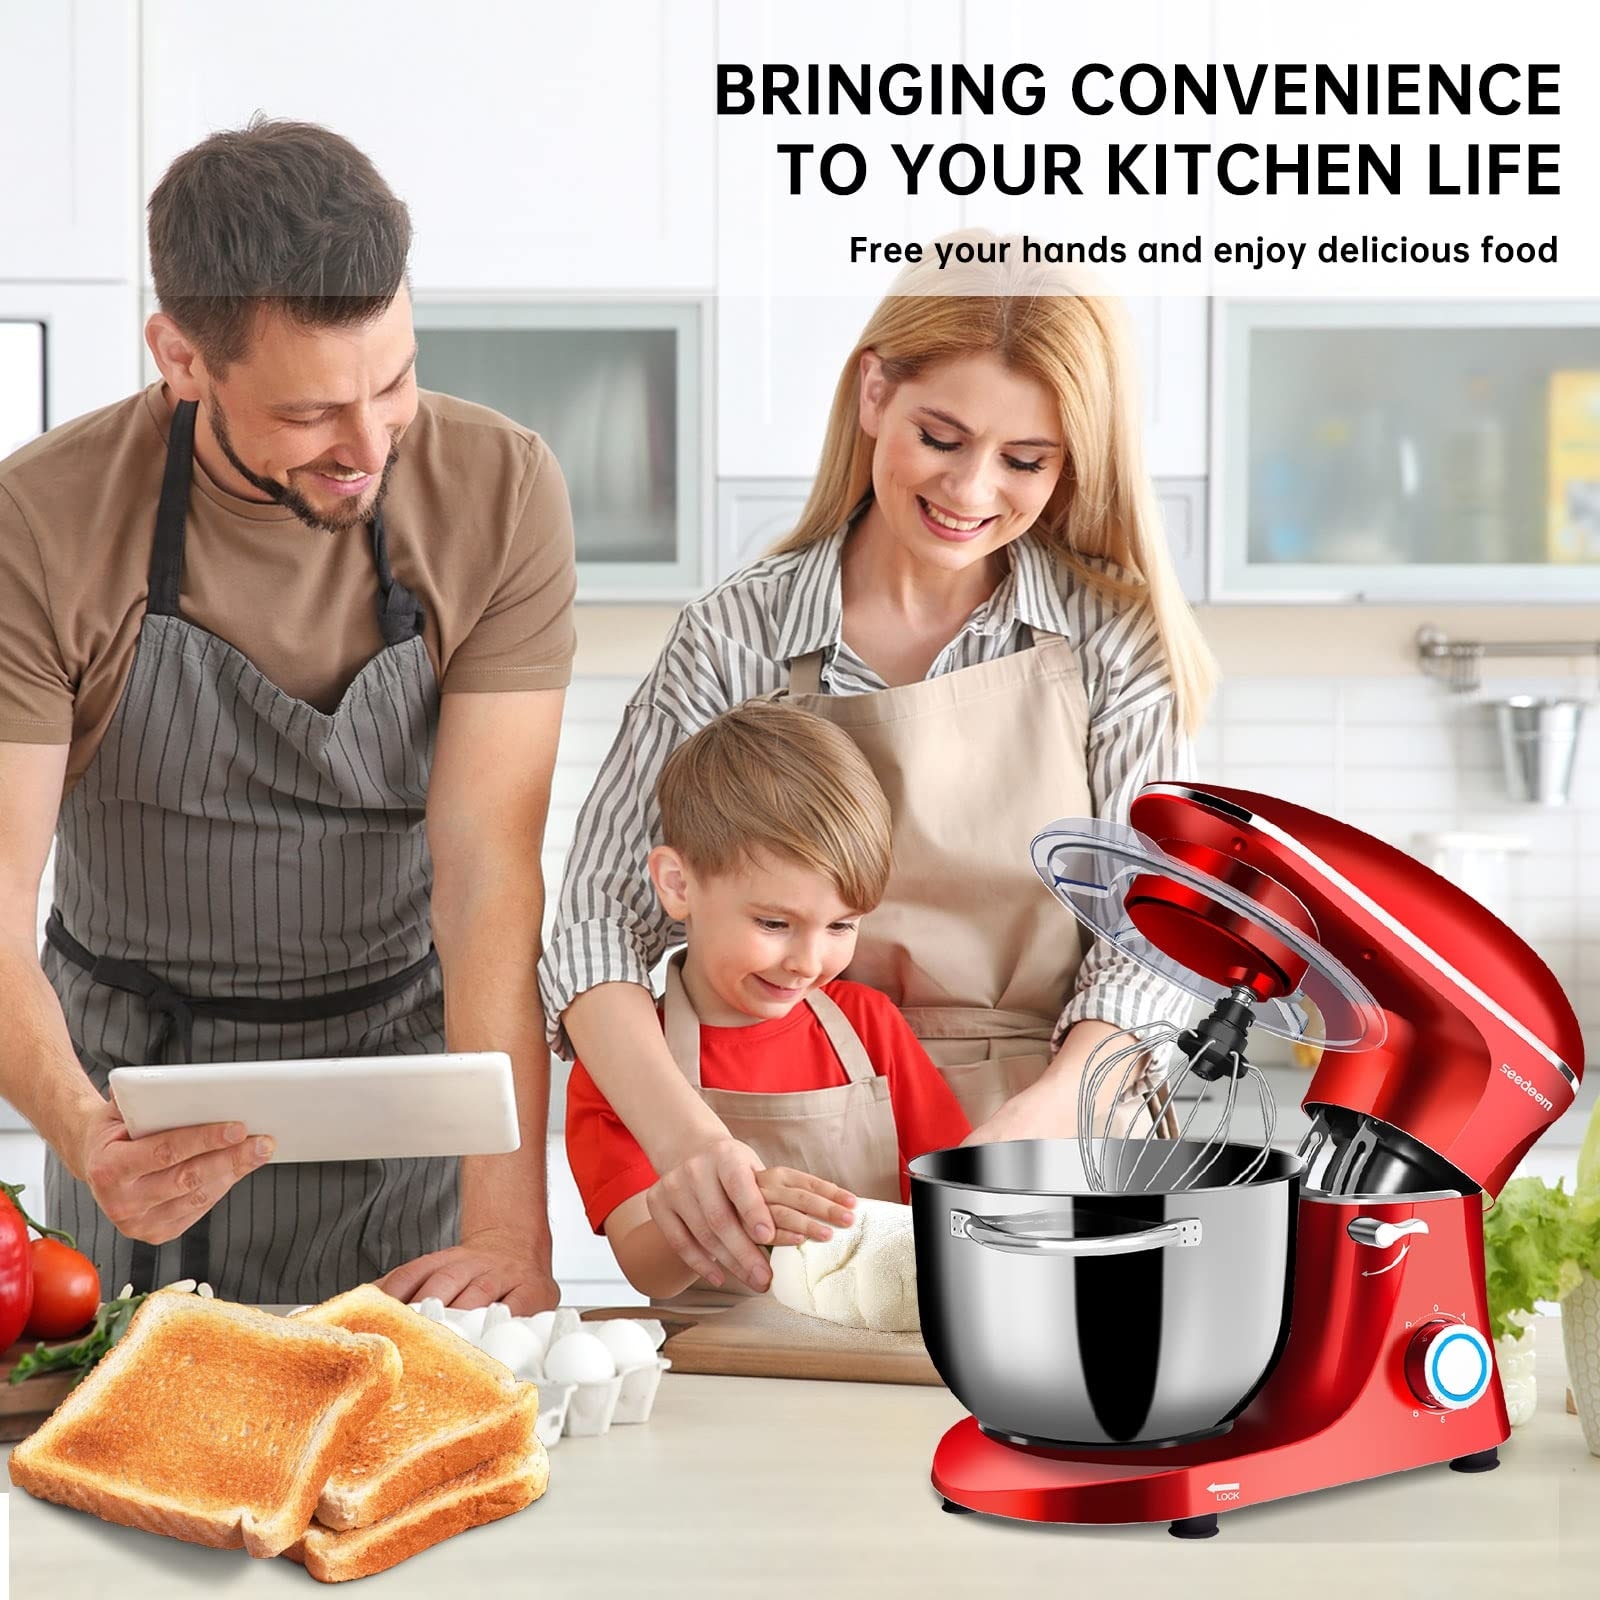 https://ak1.ostkcdn.com/images/products/is/images/direct/5fb551b3bc5bf9b8354543d742491e127c39b486/Stand-Mixer%2C-6Qt-Electric-Food-Mixer%2C-660W-6-Speeds-Tilt-Head-Dough-Mixers-with-Dishwasher-Safe-Dough-Hook%2C-Wire-Whip-%26-Beater.jpg